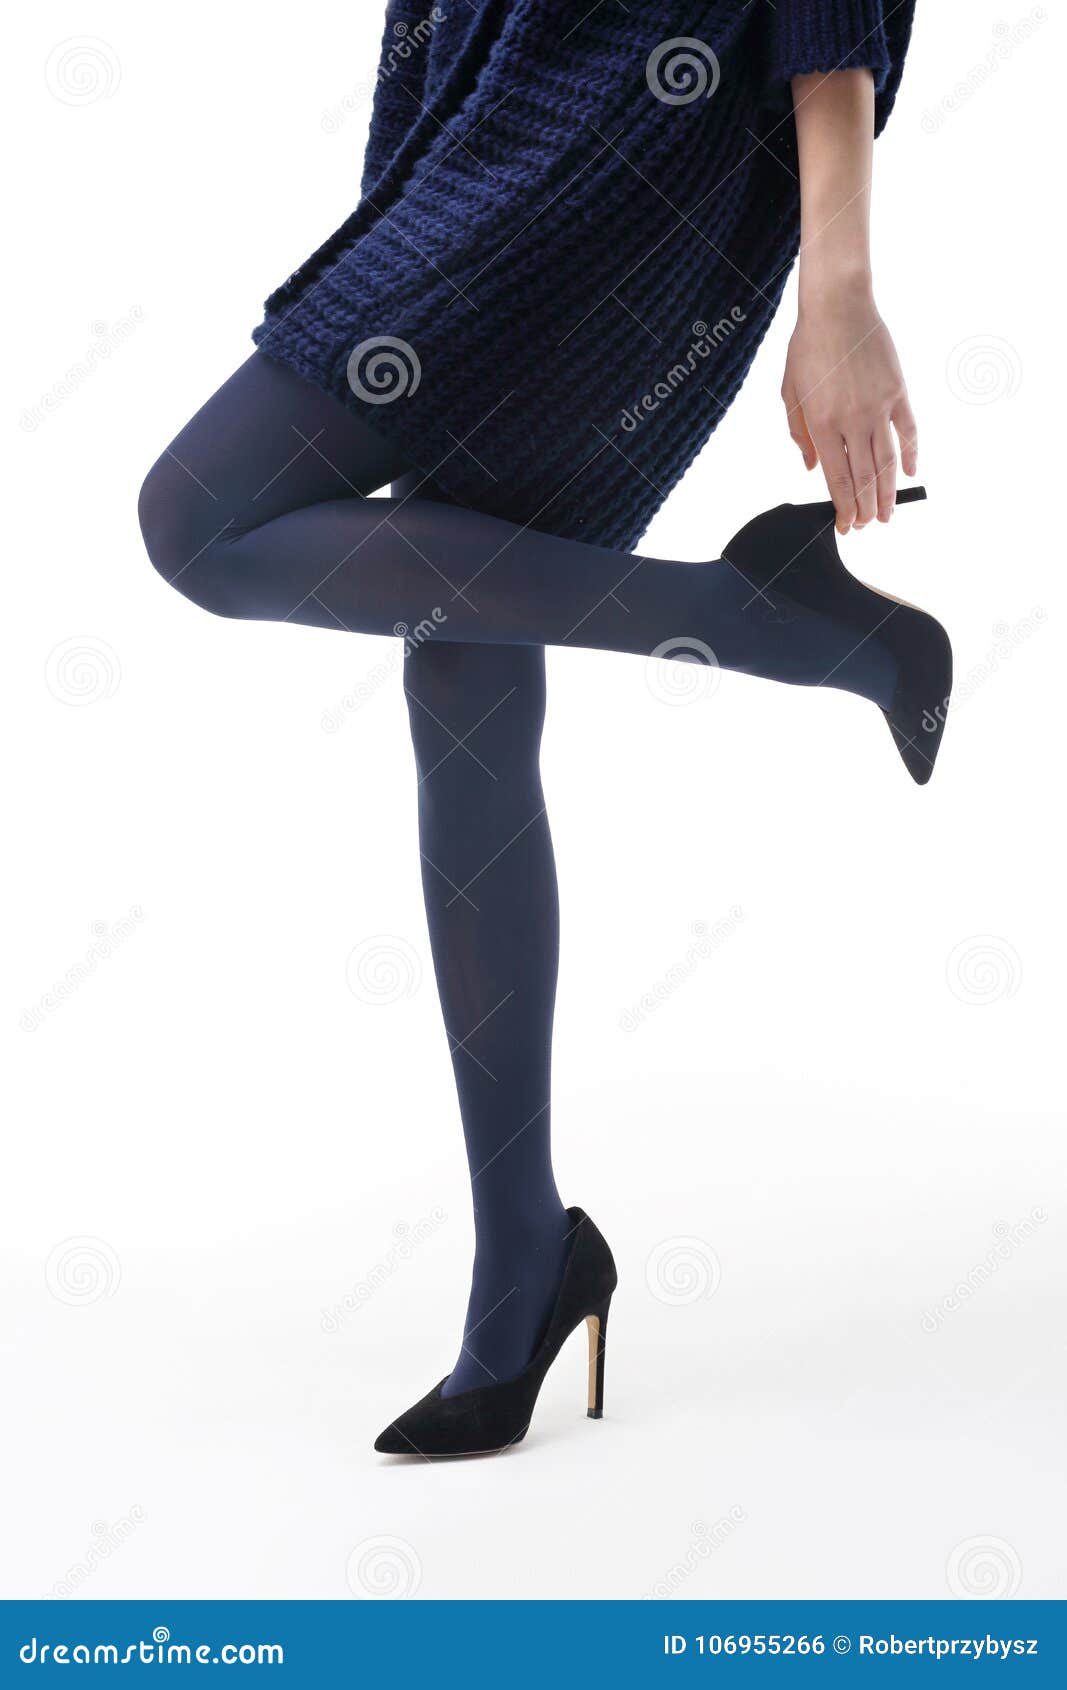 Winter Tights. Legs of a Woman in Pantyhose Stock Image - Image of  underwear, legs: 106955509